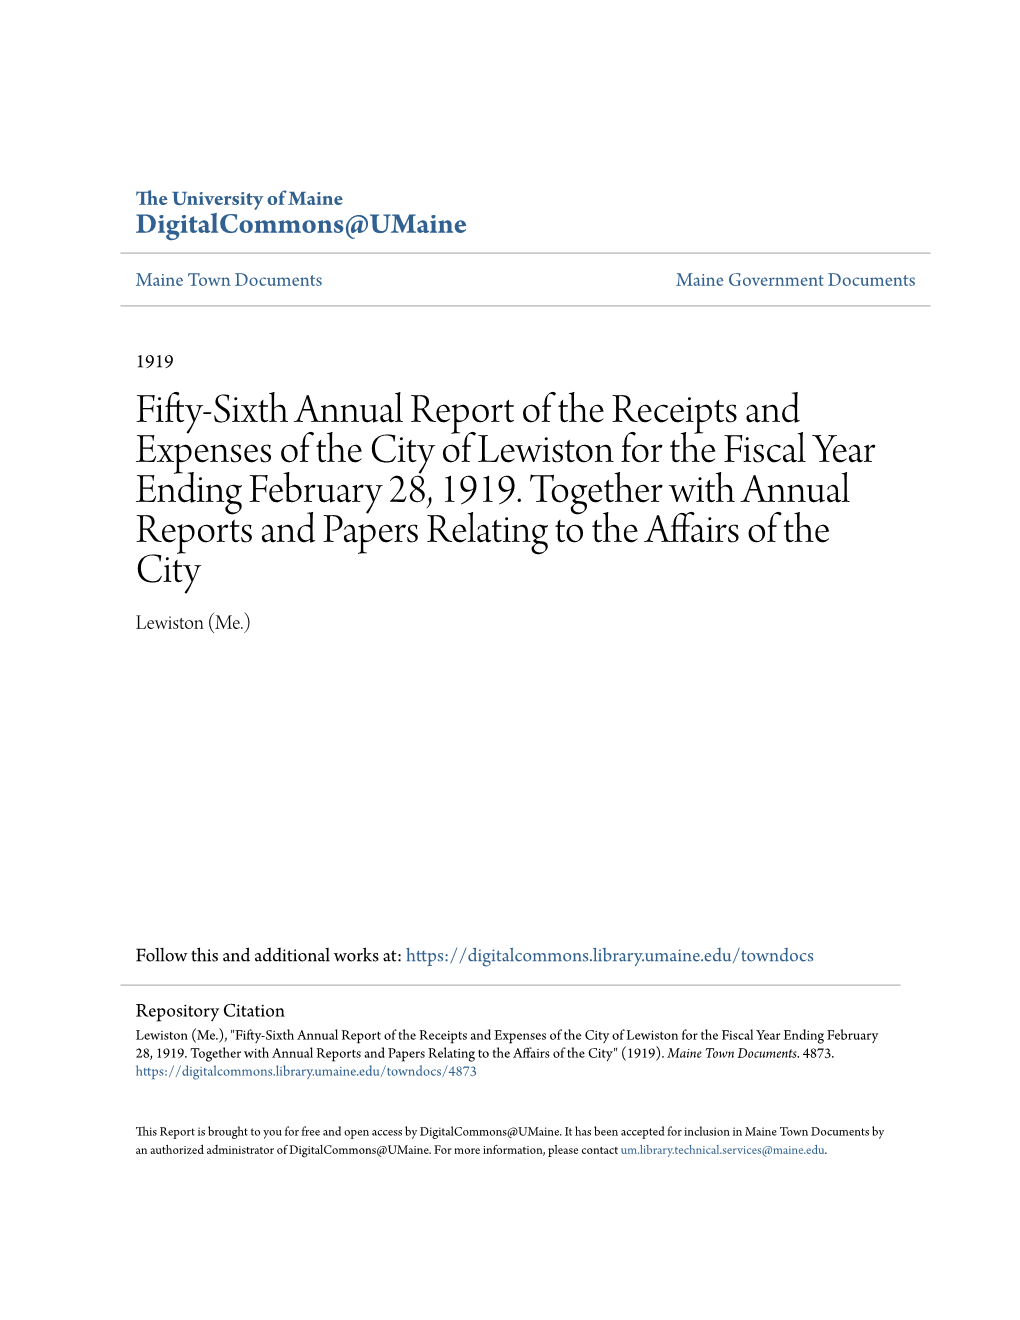 Fifty-Sixth Annual Report of the Receipts and Expenses of the City of Lewiston for the Fiscal Year Ending February 28, 1919